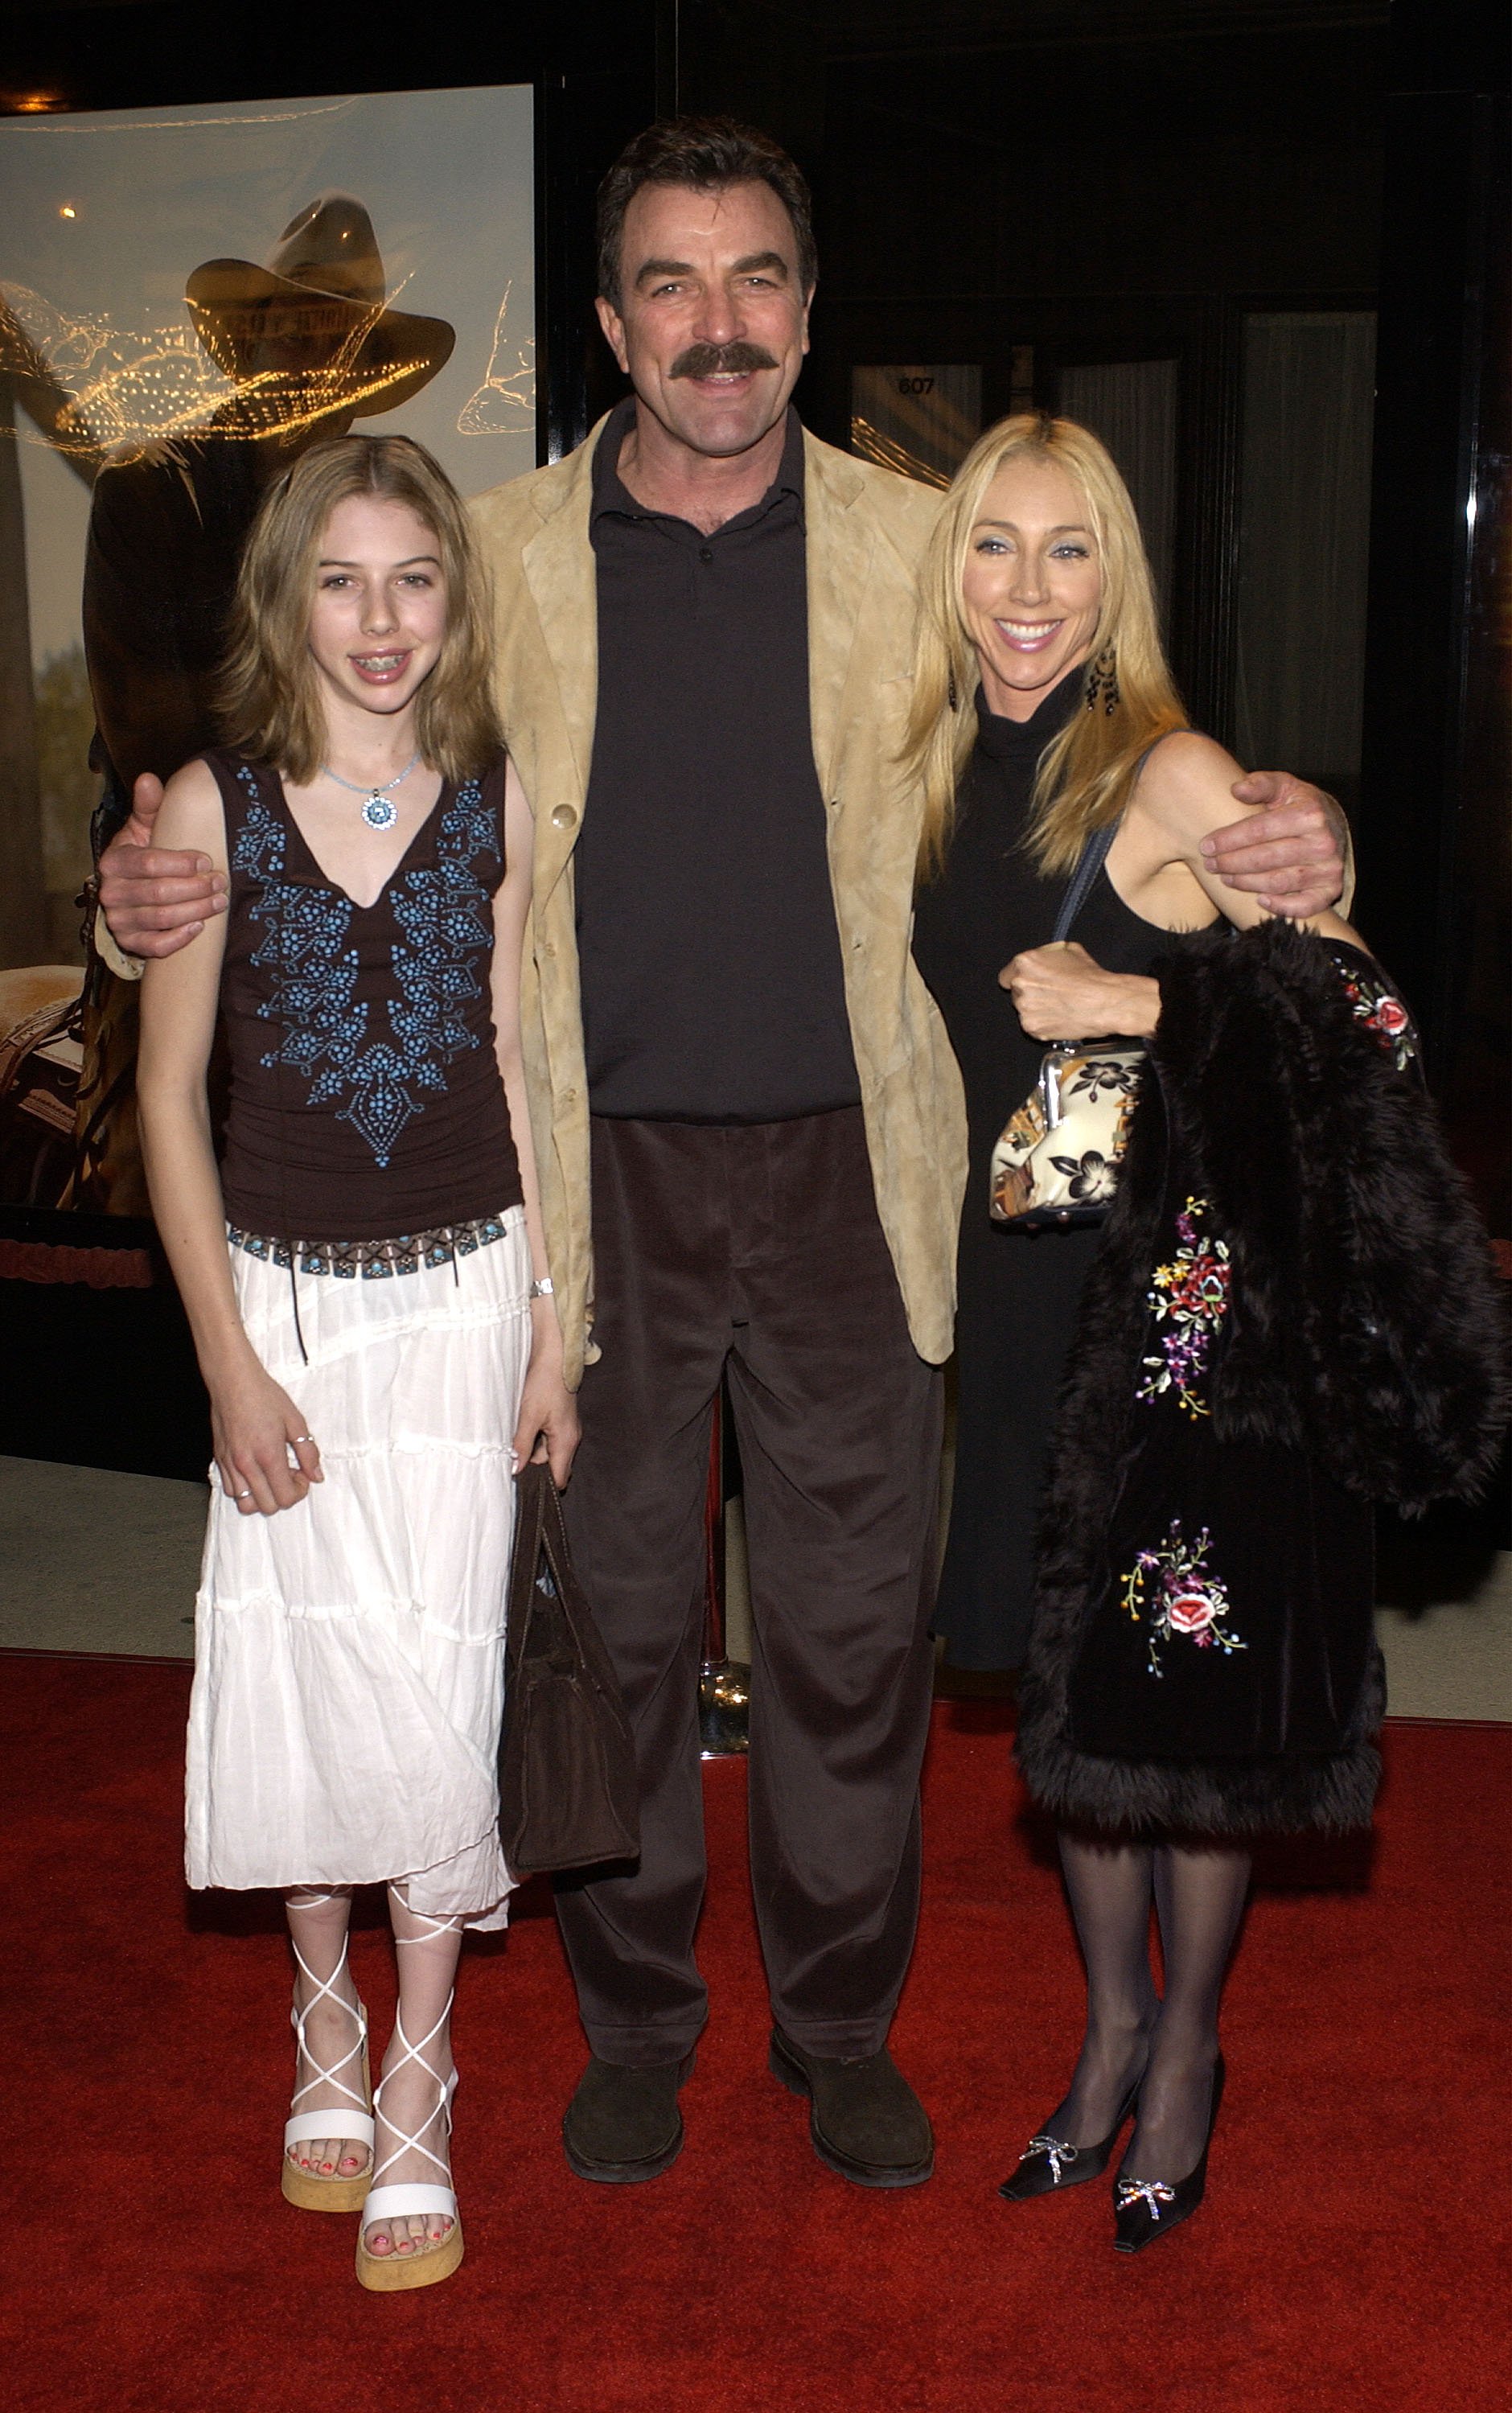 Tom Selleck with his wife Jillie Mack and daughter Hannah attend the film's premiere "Monte Walsh" on January 8, 2003 at Warner Bros.  Studios in Burbank, California |  Photo: Getty Images